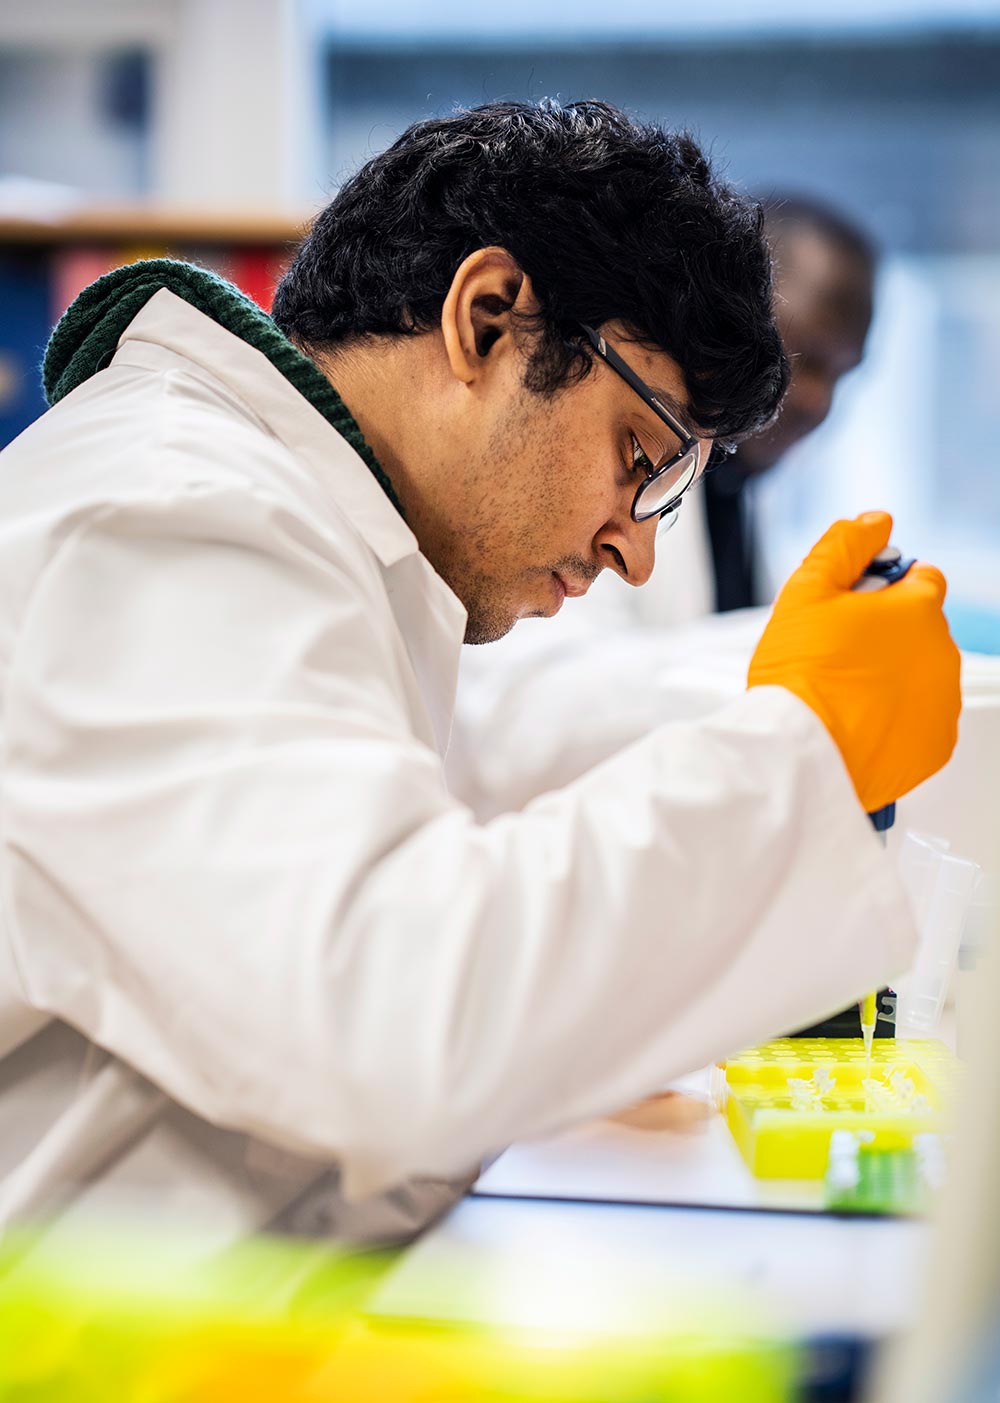 Picture of a person wearing a white coat in a laboratory, performing some sort of lab work while looking very concentrated.